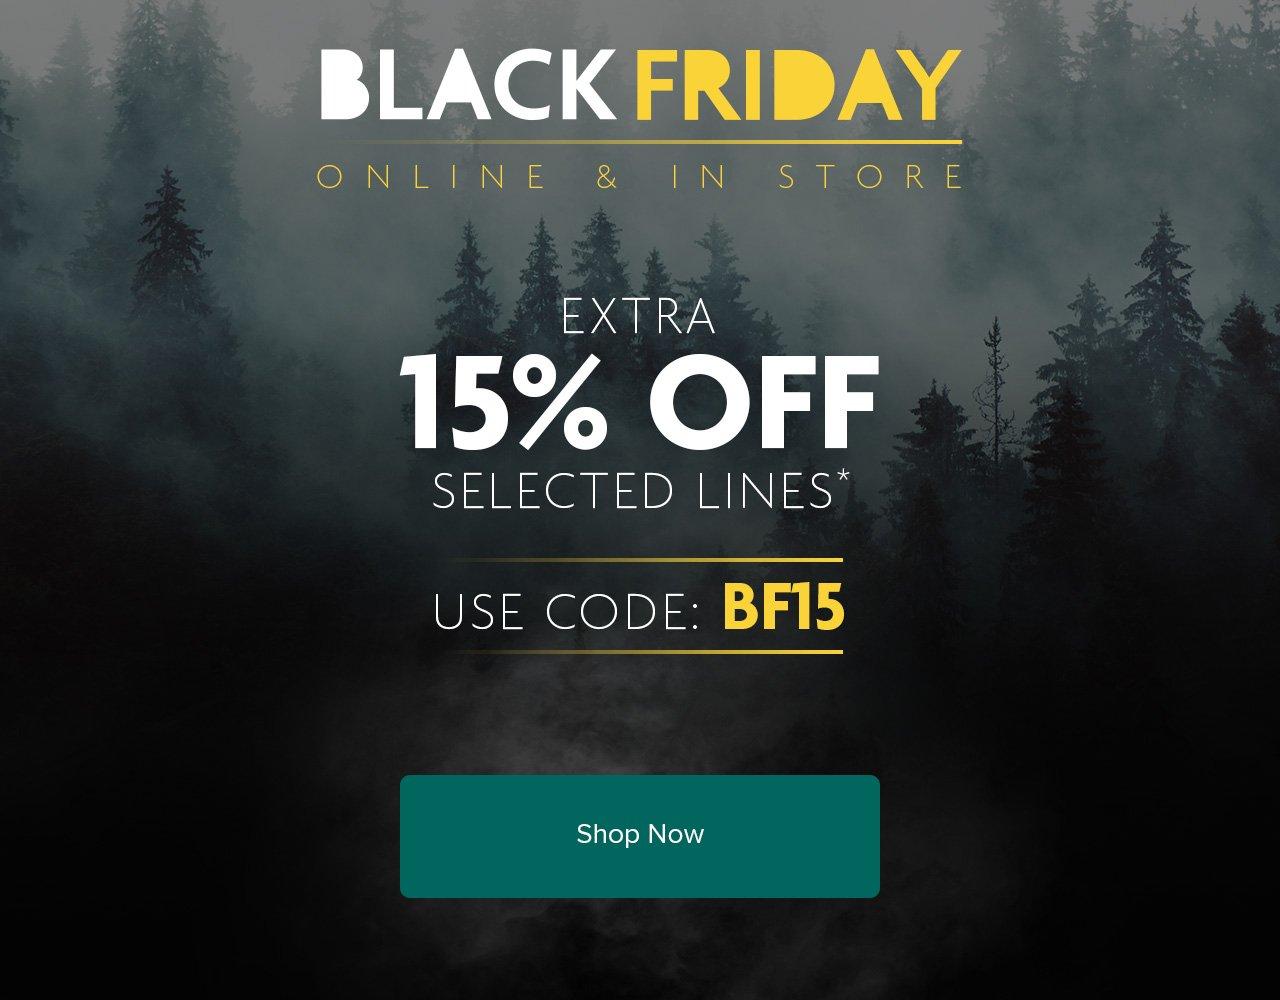 Extra 15% OFF Selected Lines* with code BF15